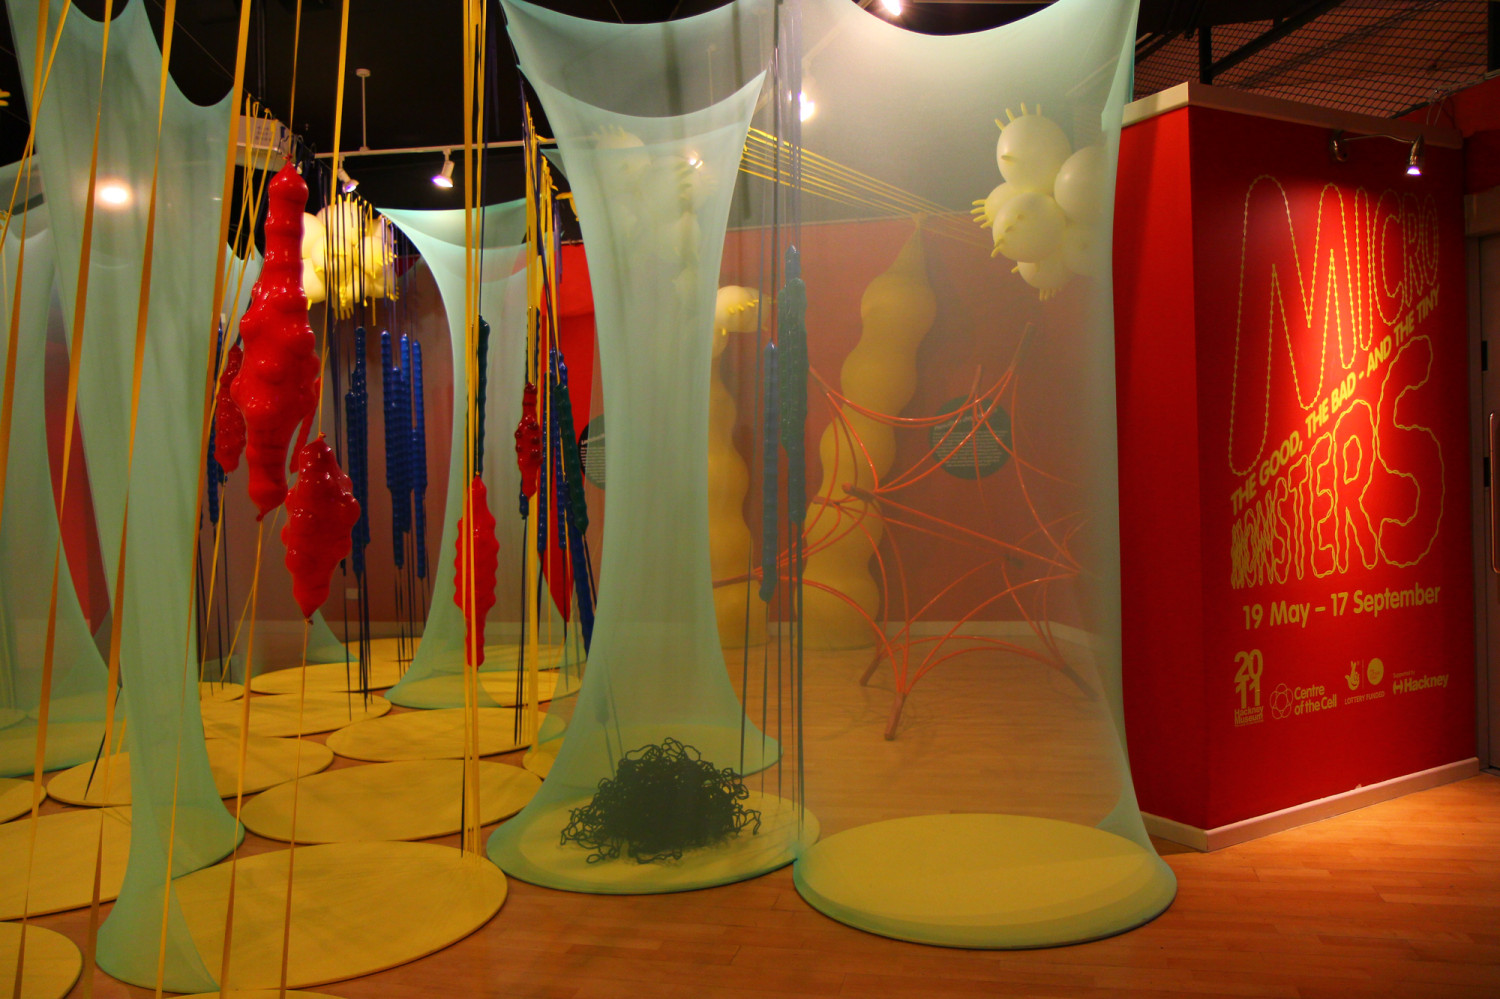 Exhibition and installation for children that celebrates the relationship between bacteria and humans